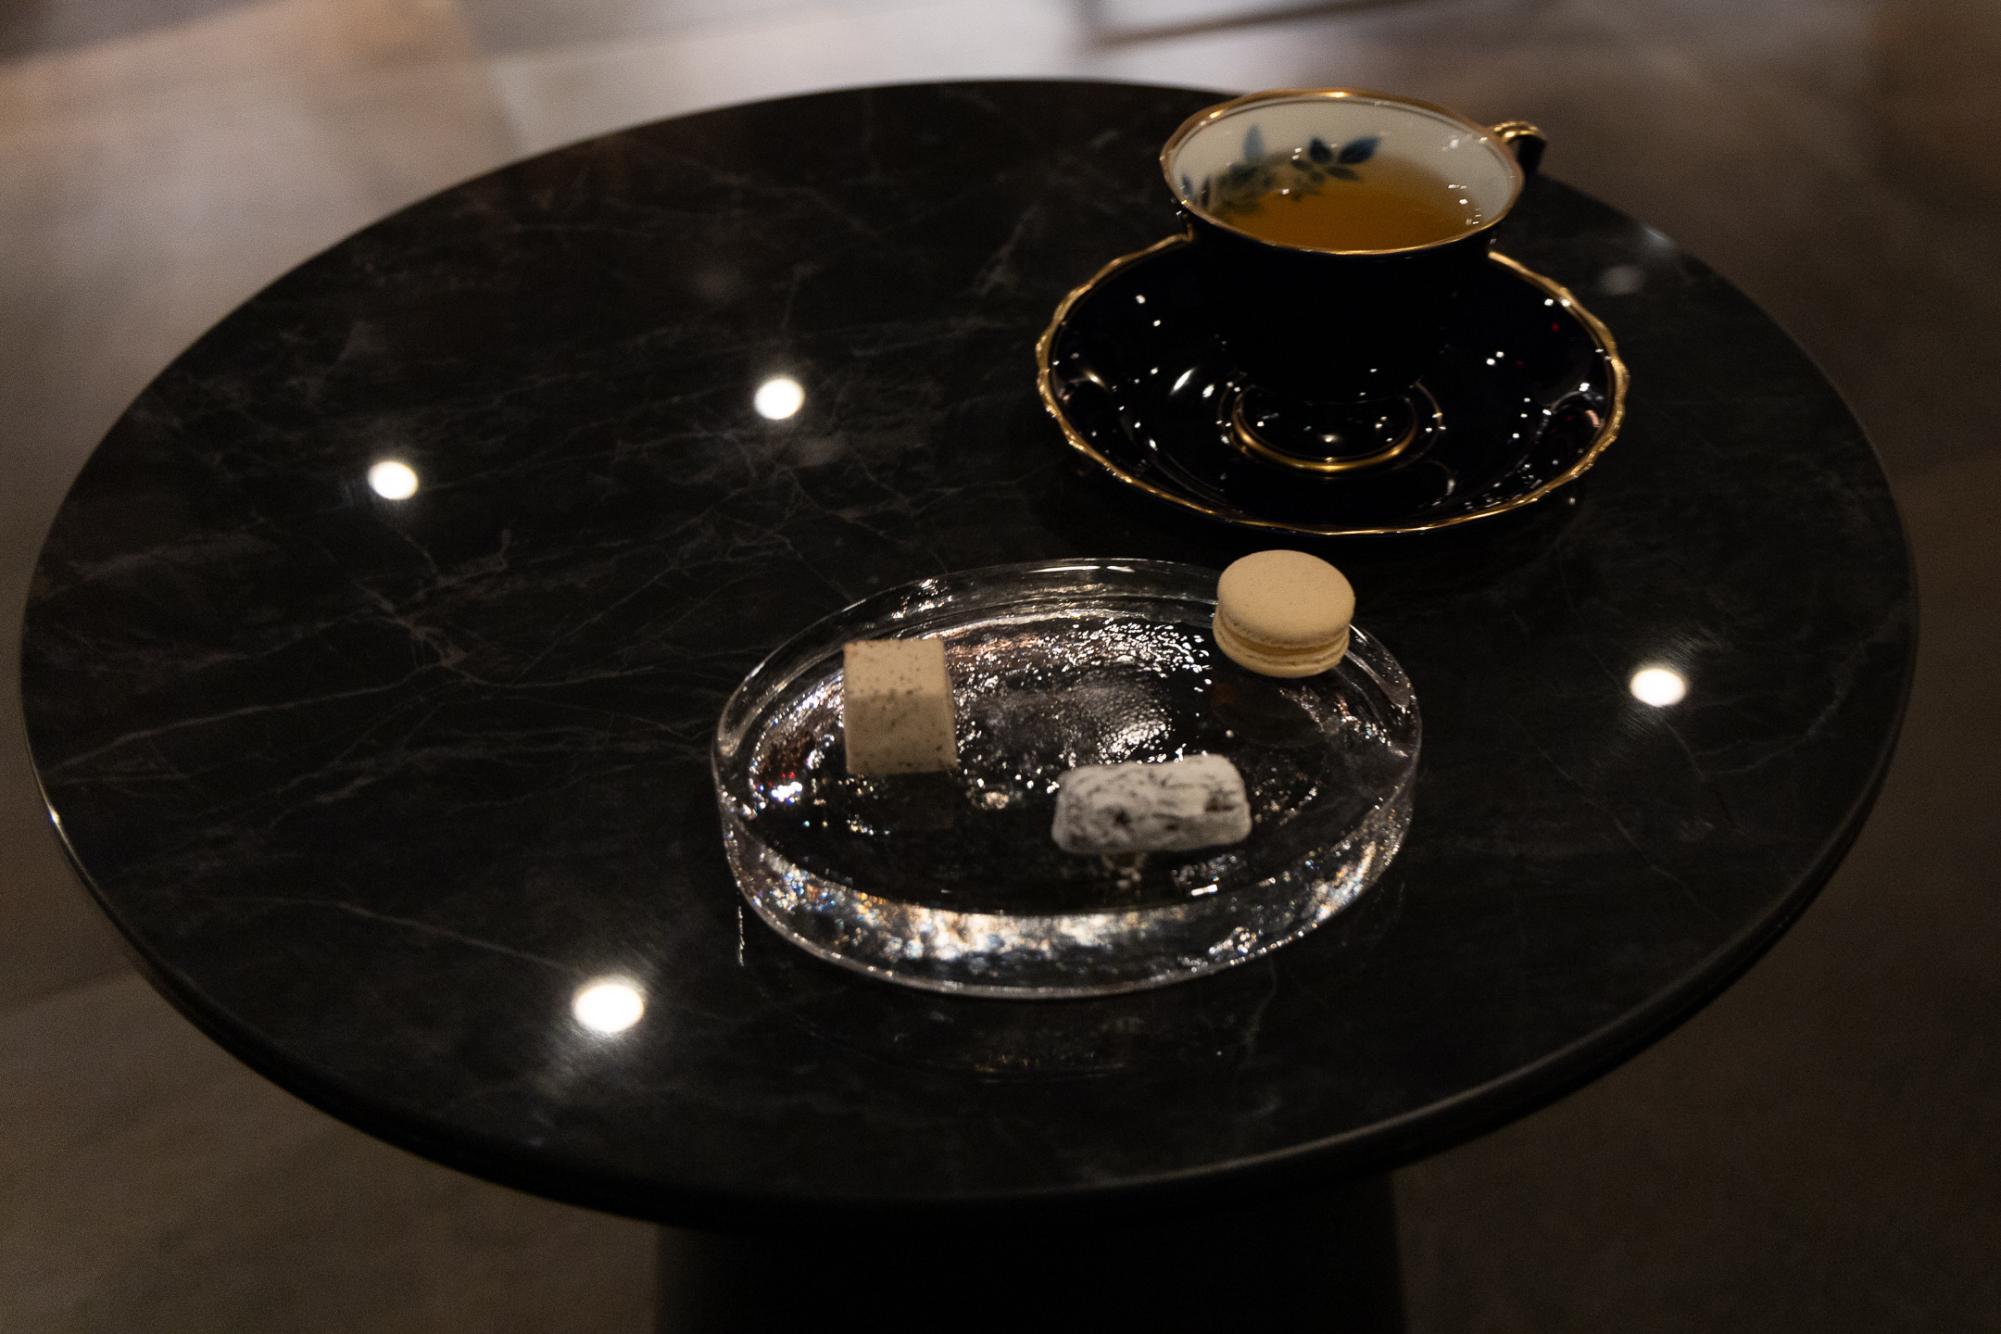 A teacup filled with yellow tea and three small desserts on a black table.